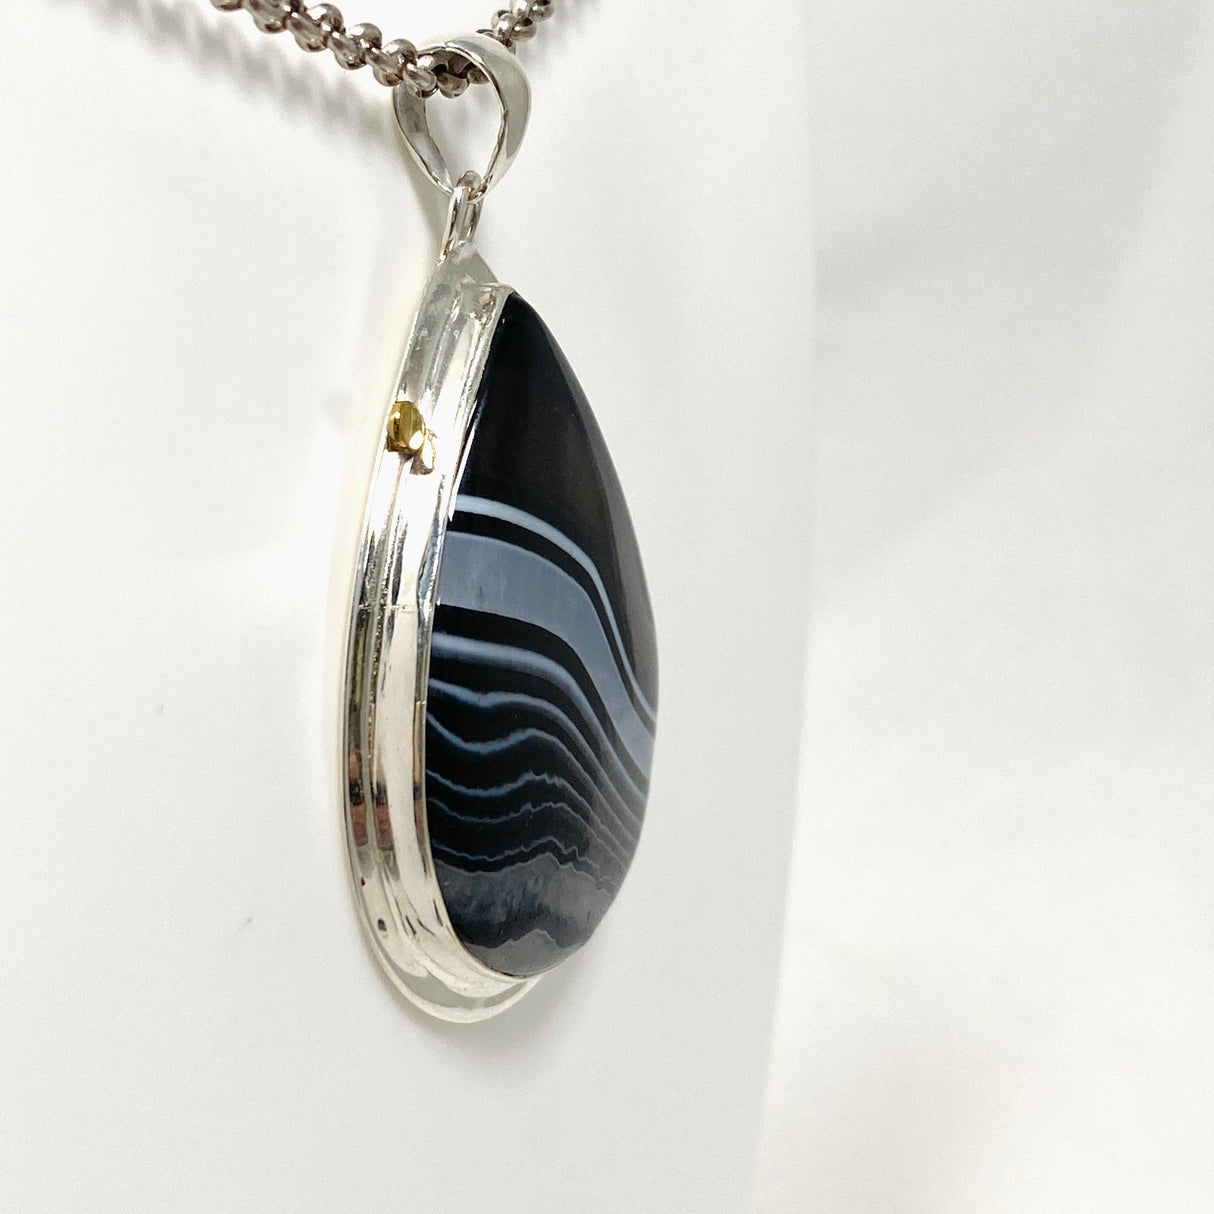 Banded Agate Teardrop Pendant with Brass Accents KPGJ4353 - Nature's Magick